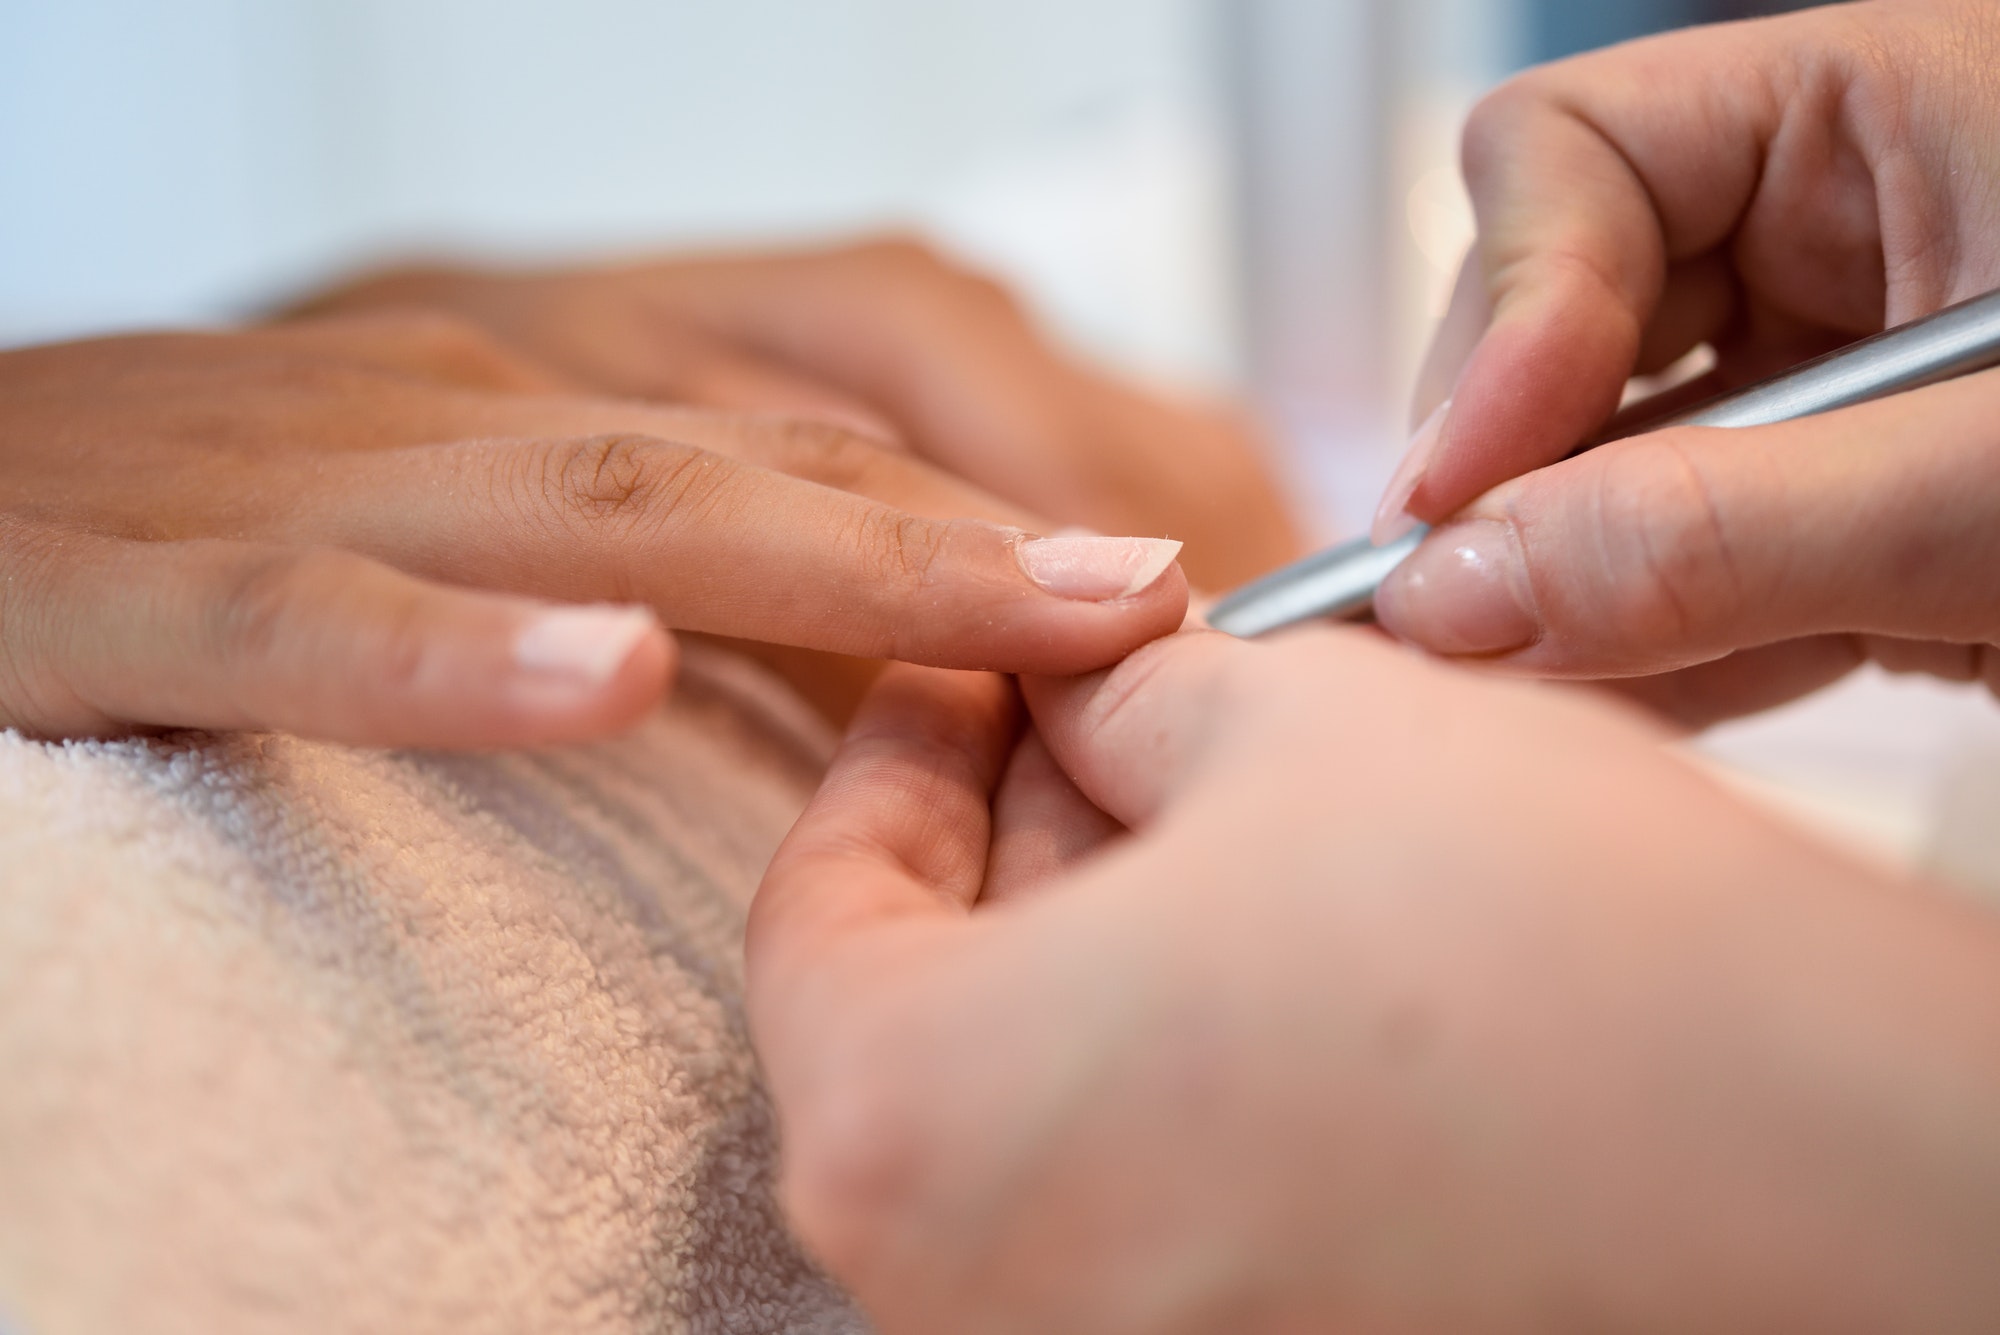 Woman in a nail salon receiving a manicure with nail file